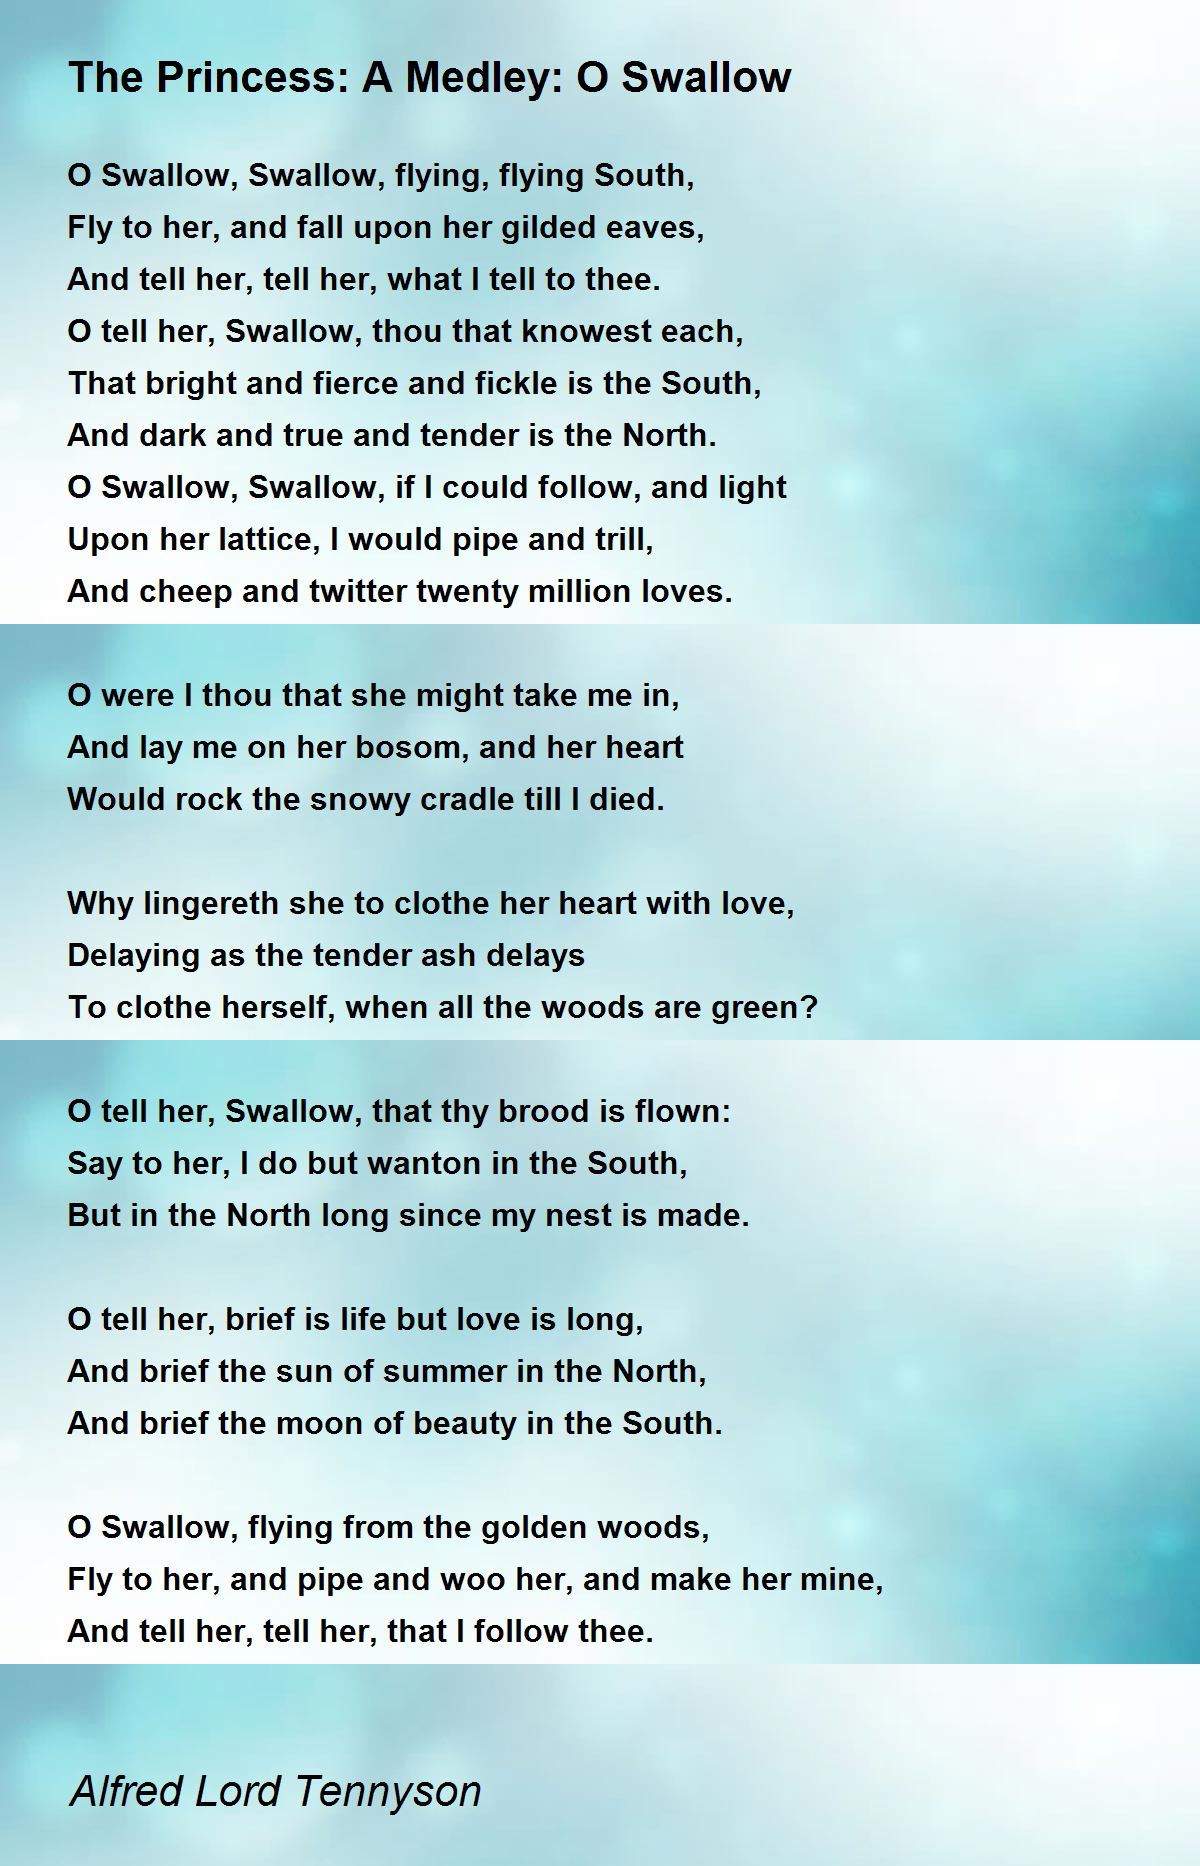 The Princess: A Medley: O Swallow by Alfred Lord Tennyson - The ...